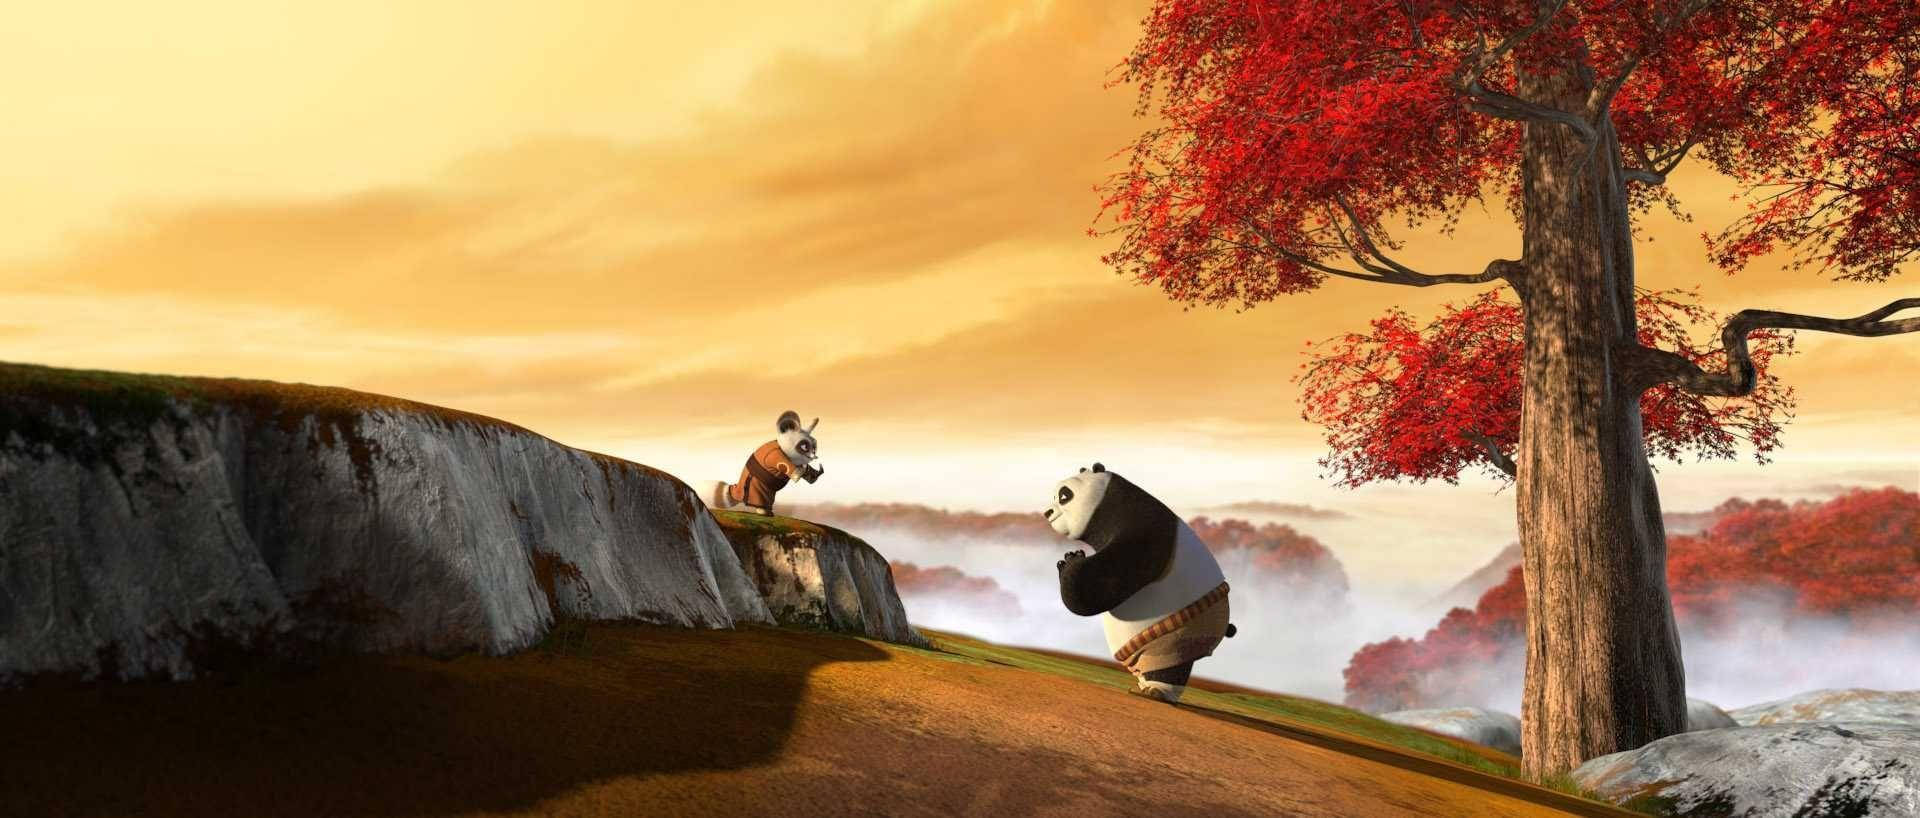 Caption: Shifu And Kung Fu Panda In A Moment Of Respect Background